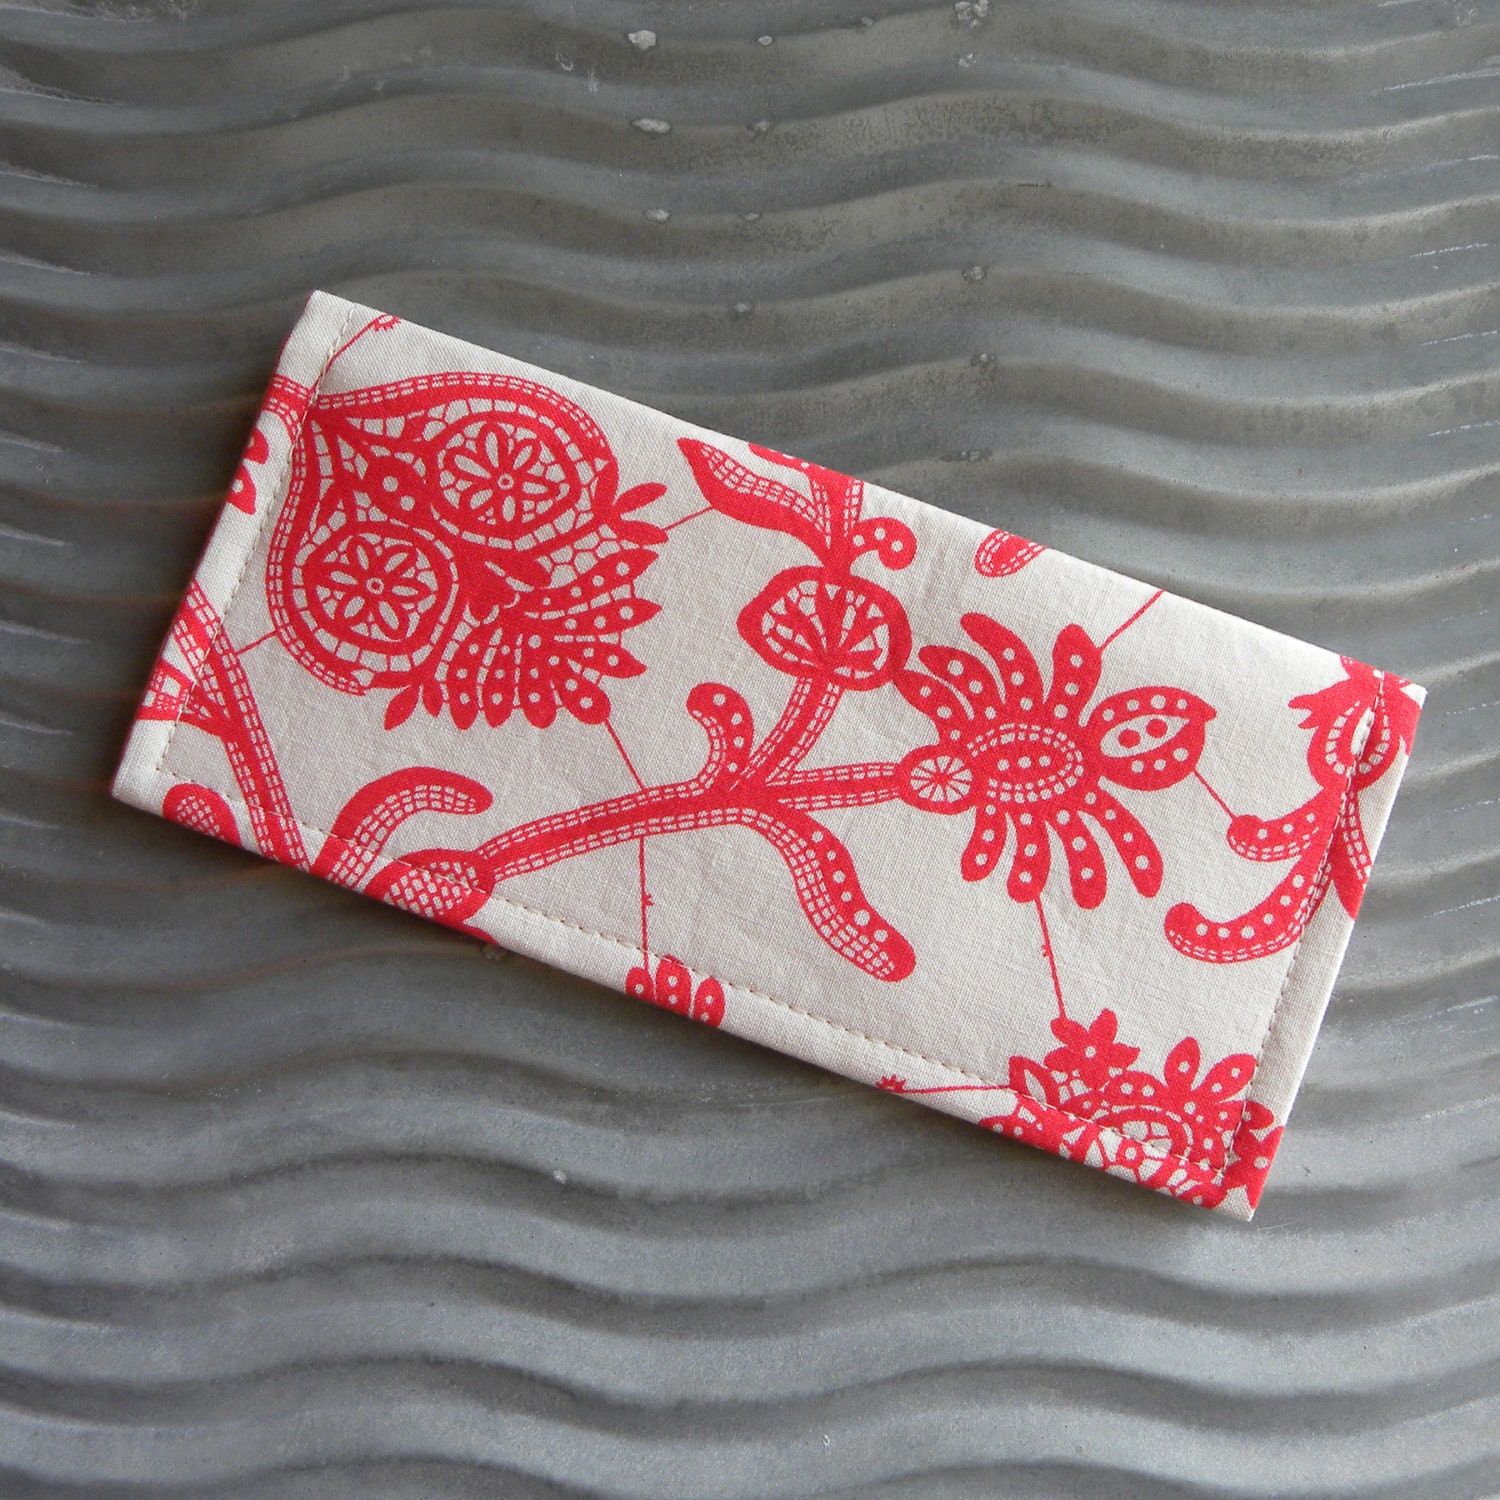 Coupon Organizer Holder Raspberry Red and Cream